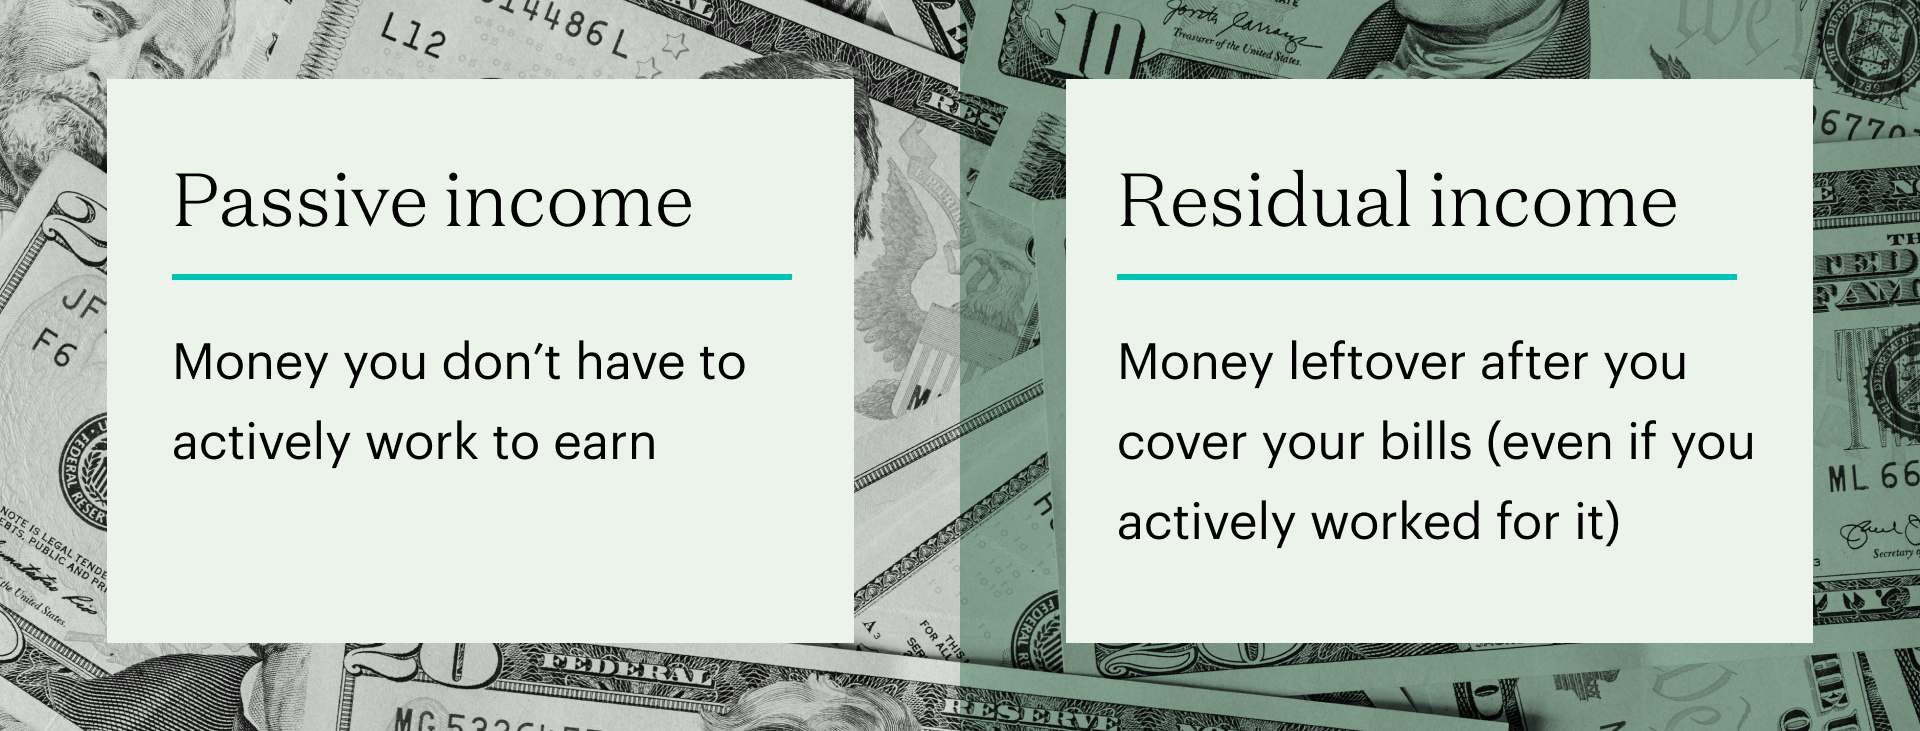 accessibility, definitions of passive income and residual income